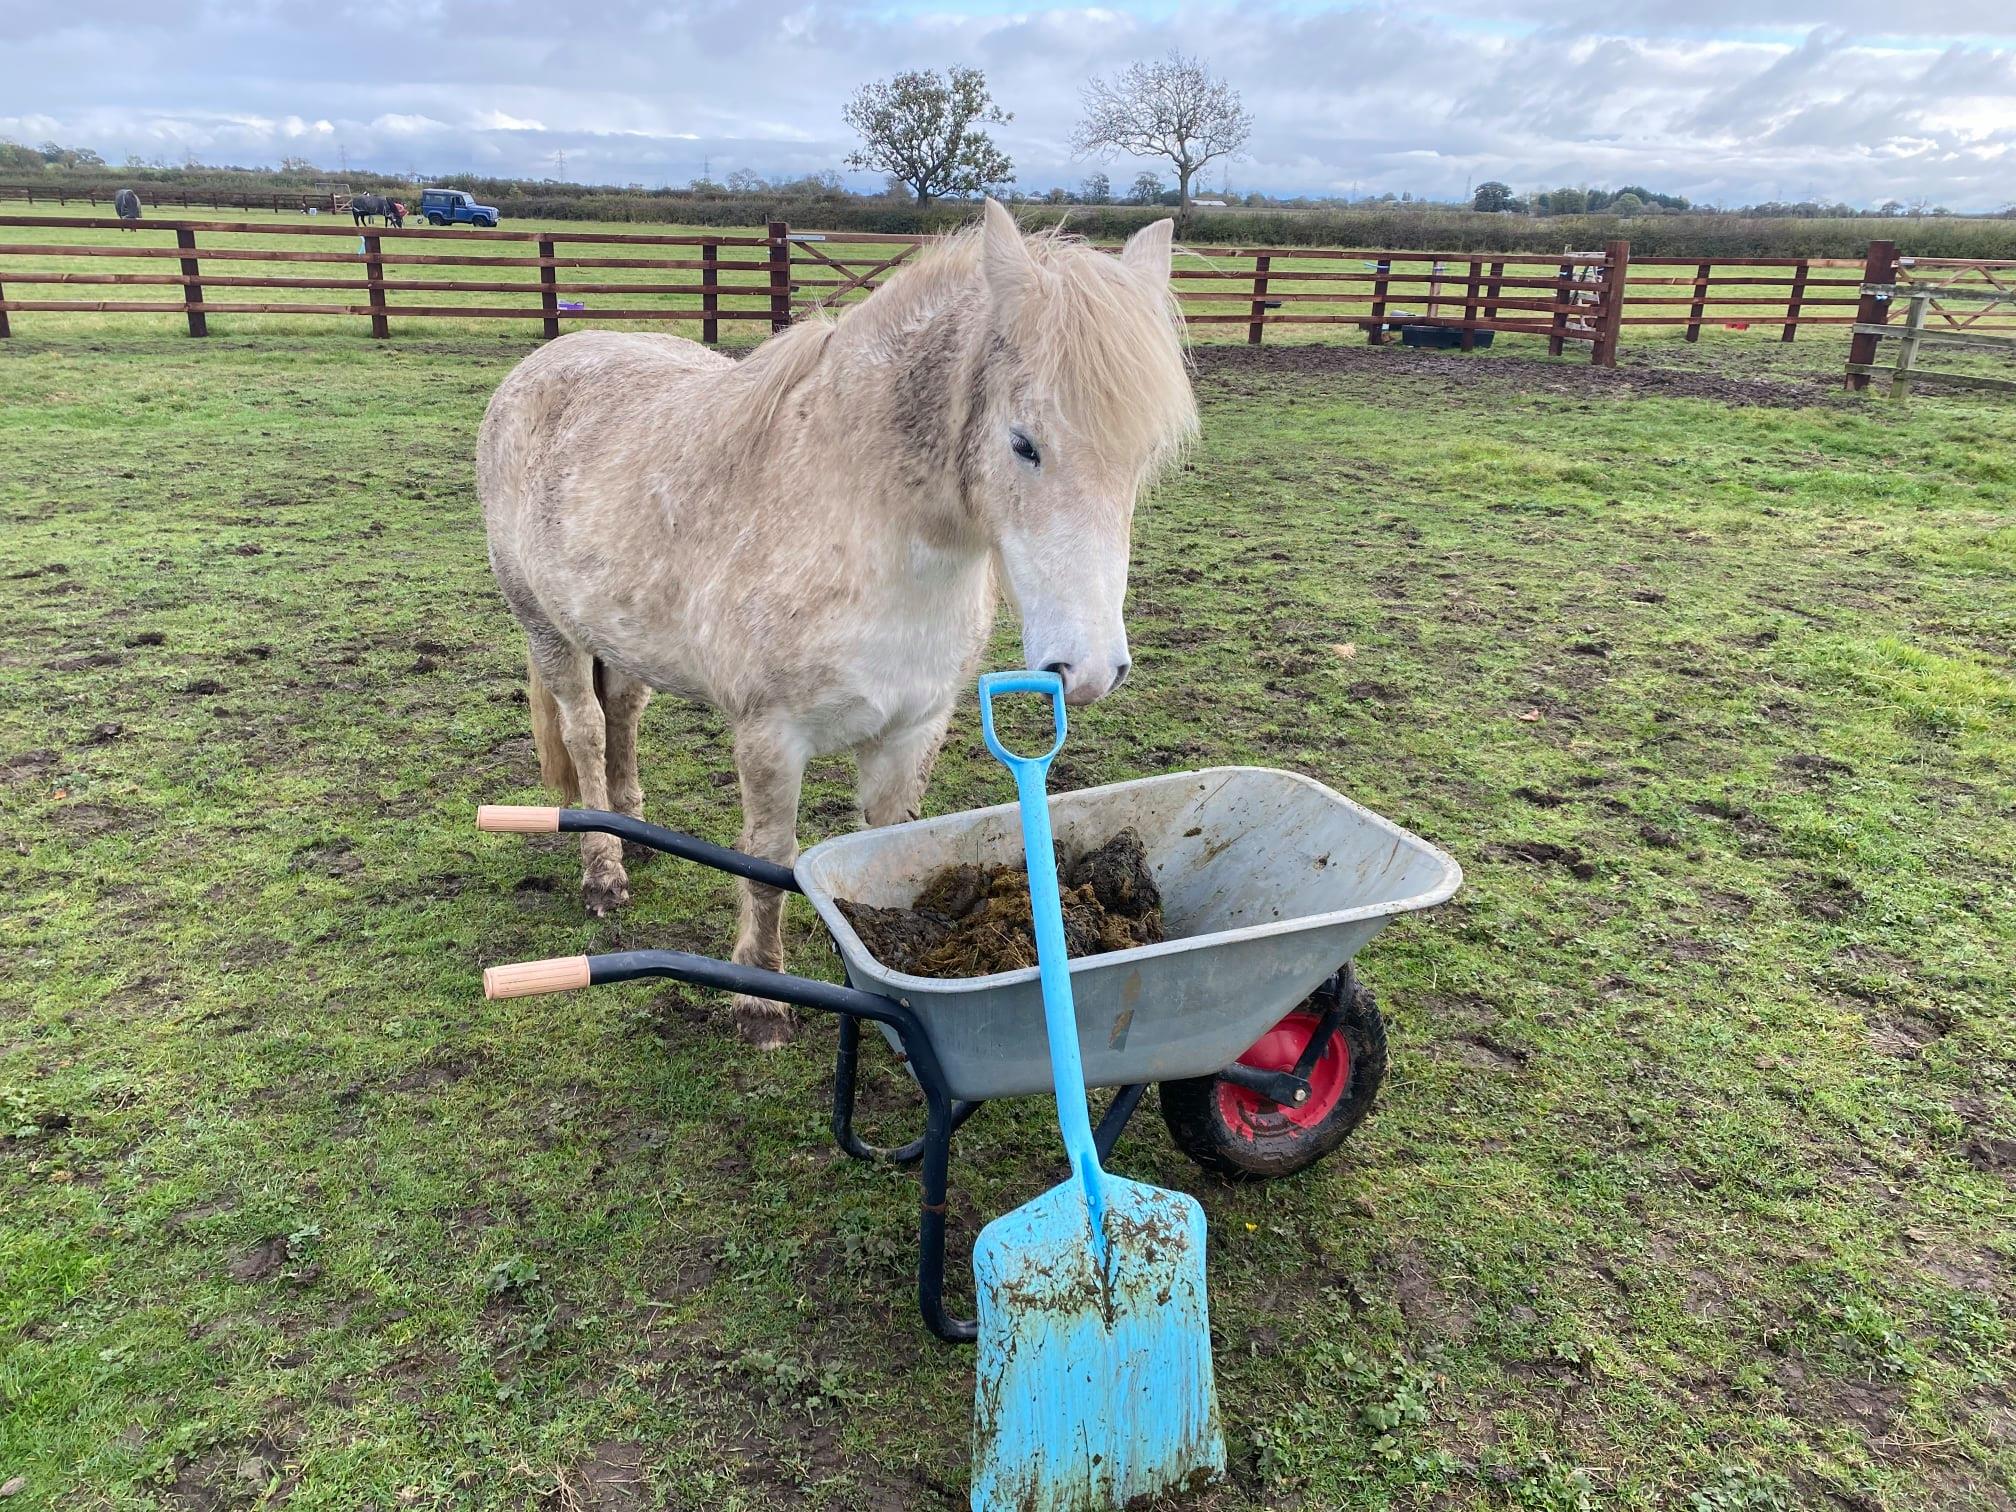 Pearl is our companion pony for our thoroughbred foals, and we have offered her up to Boris for negotiations for Brexit